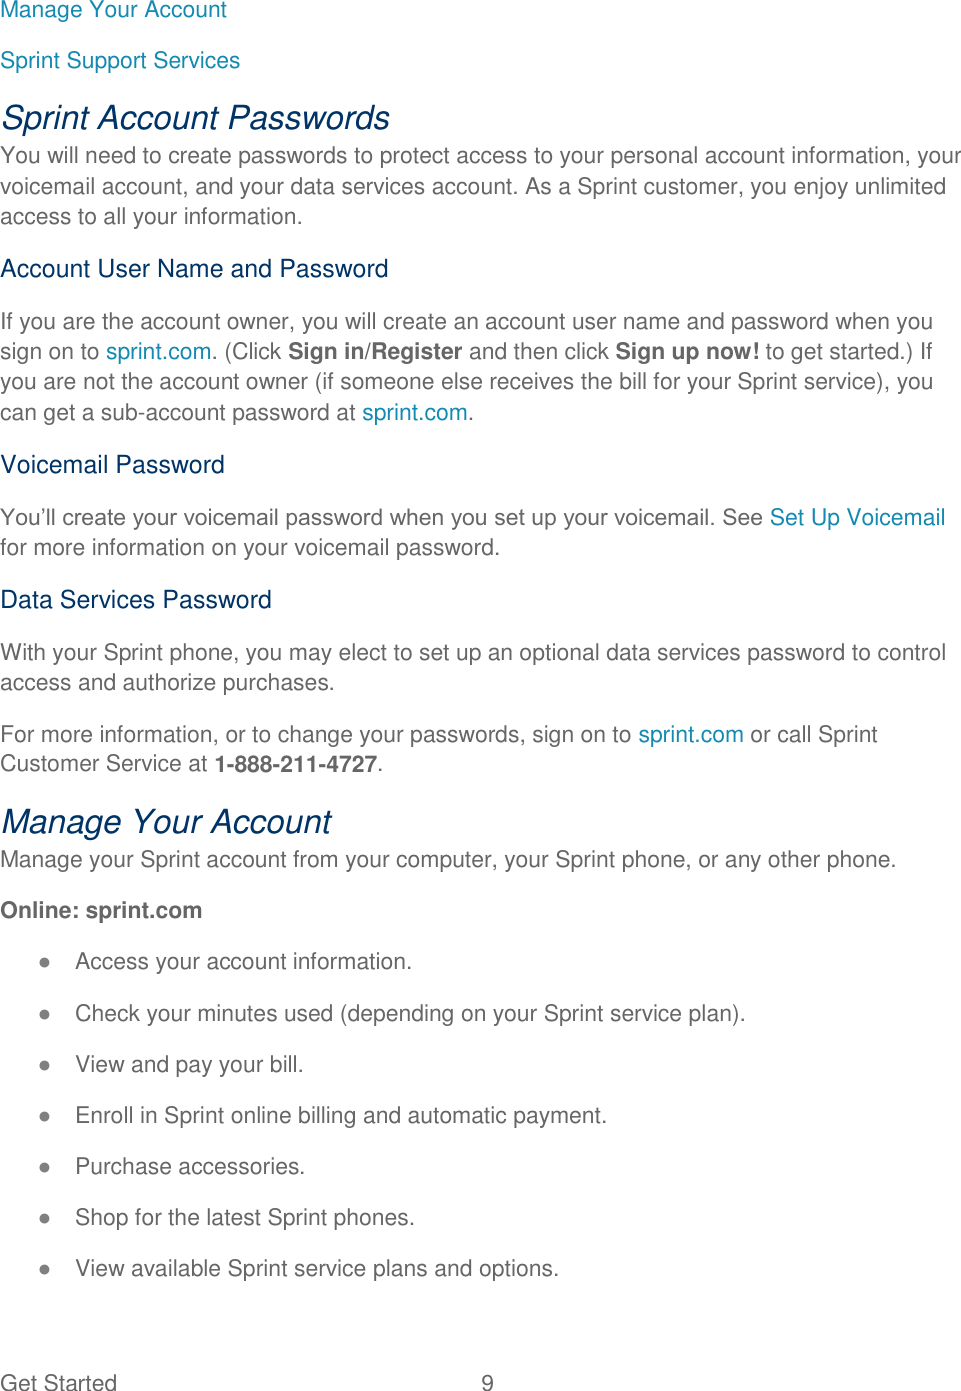 Get Started  9   Manage Your Account Sprint Support Services Sprint Account Passwords You will need to create passwords to protect access to your personal account information, your voicemail account, and your data services account. As a Sprint customer, you enjoy unlimited access to all your information. Account User Name and Password If you are the account owner, you will create an account user name and password when you sign on to sprint.com. (Click Sign in/Register and then click Sign up now! to get started.) If you are not the account owner (if someone else receives the bill for your Sprint service), you can get a sub-account password at sprint.com. Voicemail Password You’ll create your voicemail password when you set up your voicemail. See Set Up Voicemail for more information on your voicemail password. Data Services Password With your Sprint phone, you may elect to set up an optional data services password to control access and authorize purchases. For more information, or to change your passwords, sign on to sprint.com or call Sprint Customer Service at 1-888-211-4727. Manage Your Account Manage your Sprint account from your computer, your Sprint phone, or any other phone. Online: sprint.com ● Access your account information. ● Check your minutes used (depending on your Sprint service plan). ● View and pay your bill. ● Enroll in Sprint online billing and automatic payment. ● Purchase accessories. ● Shop for the latest Sprint phones. ● View available Sprint service plans and options. 